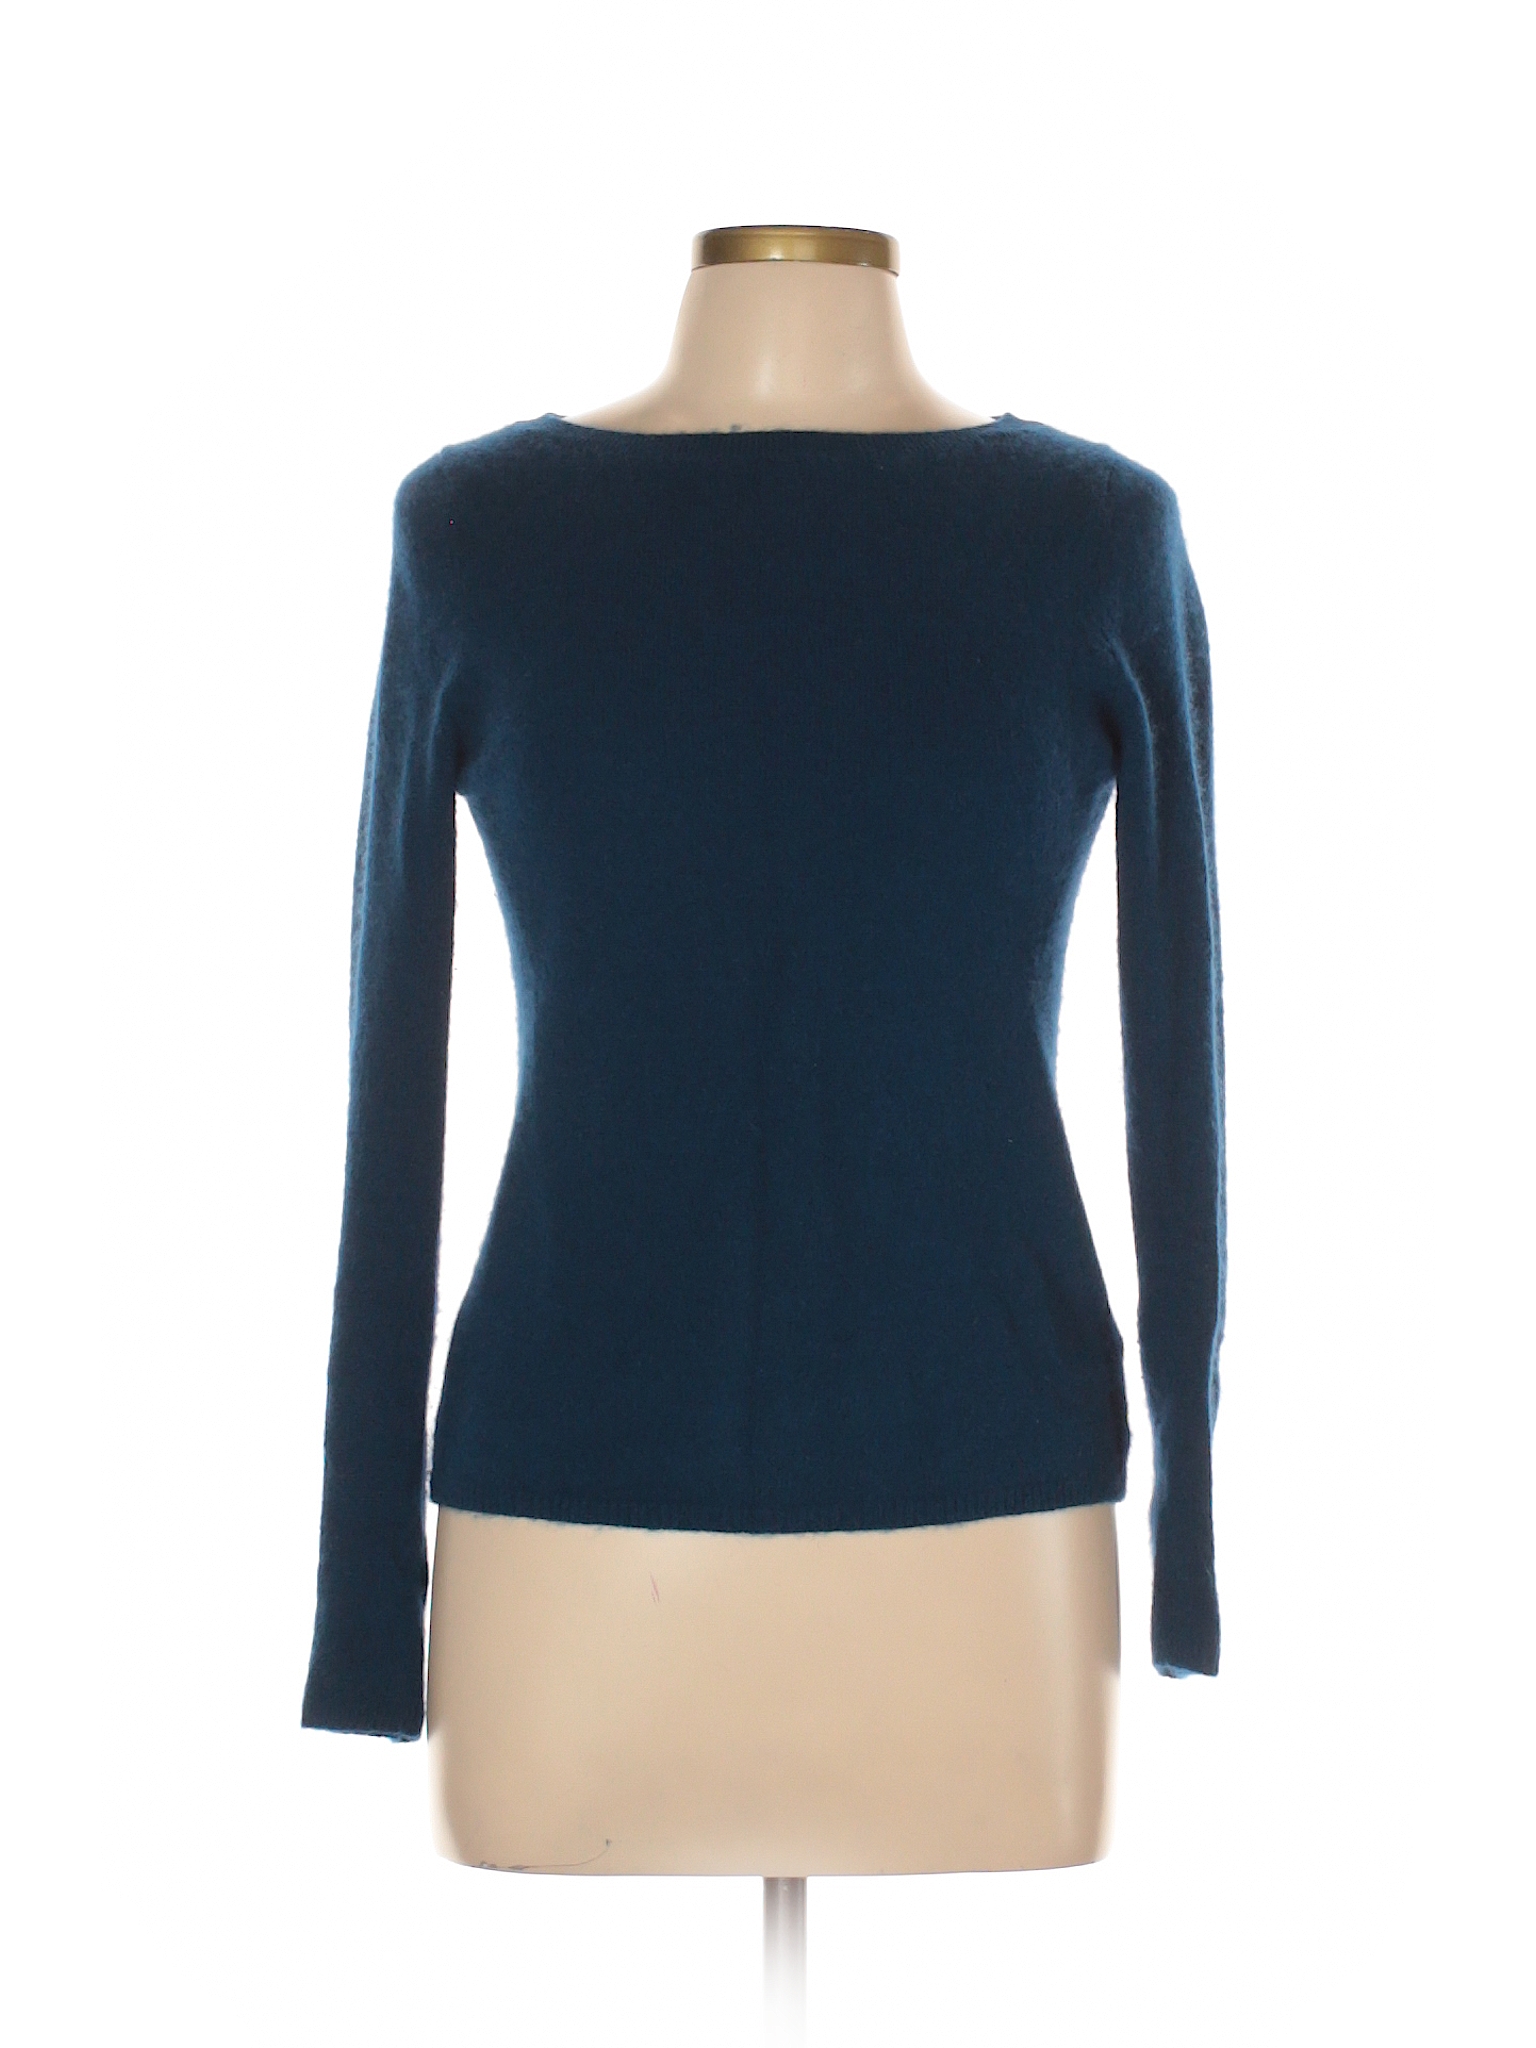 Adrienne Vittadini 100% Cashmere Solid Teal Cashmere Pullover Sweater ...